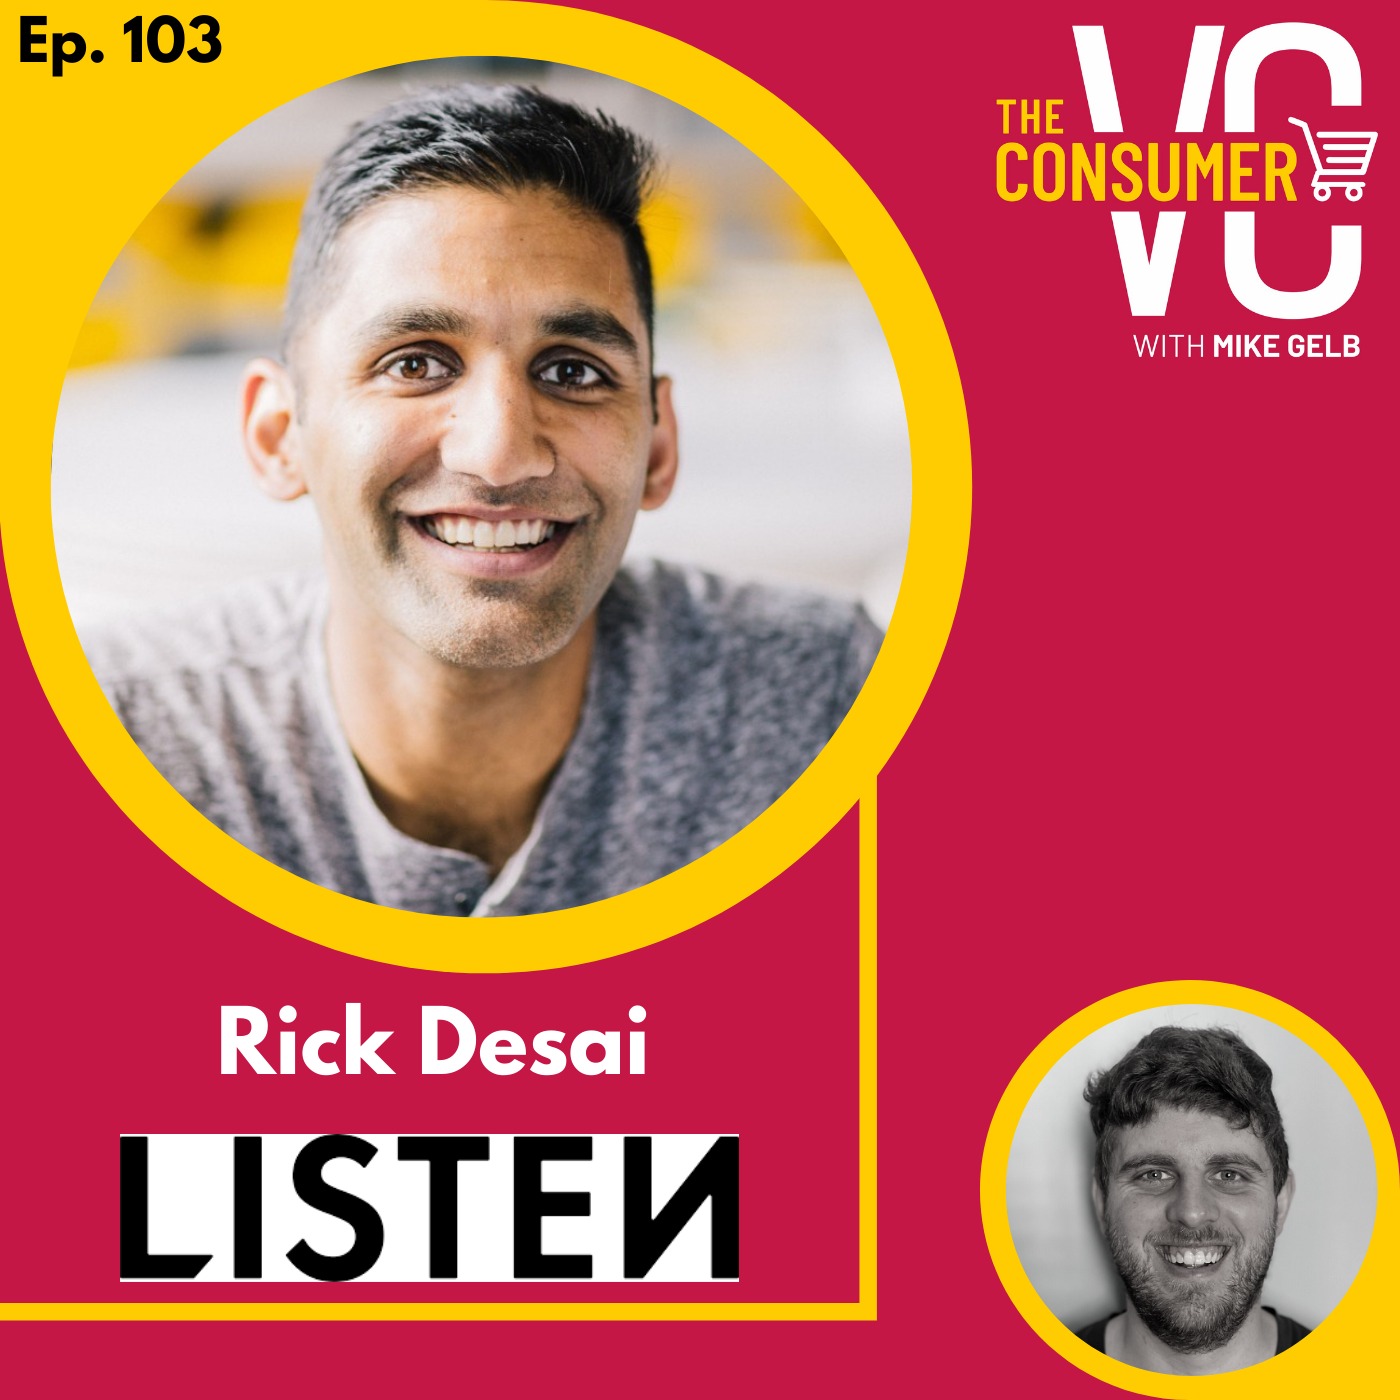 Rick Desai (Listen) - What Makes a Compelling Brand, Why He Loves Patagonia, and His Approach to Investing in Consumer Products